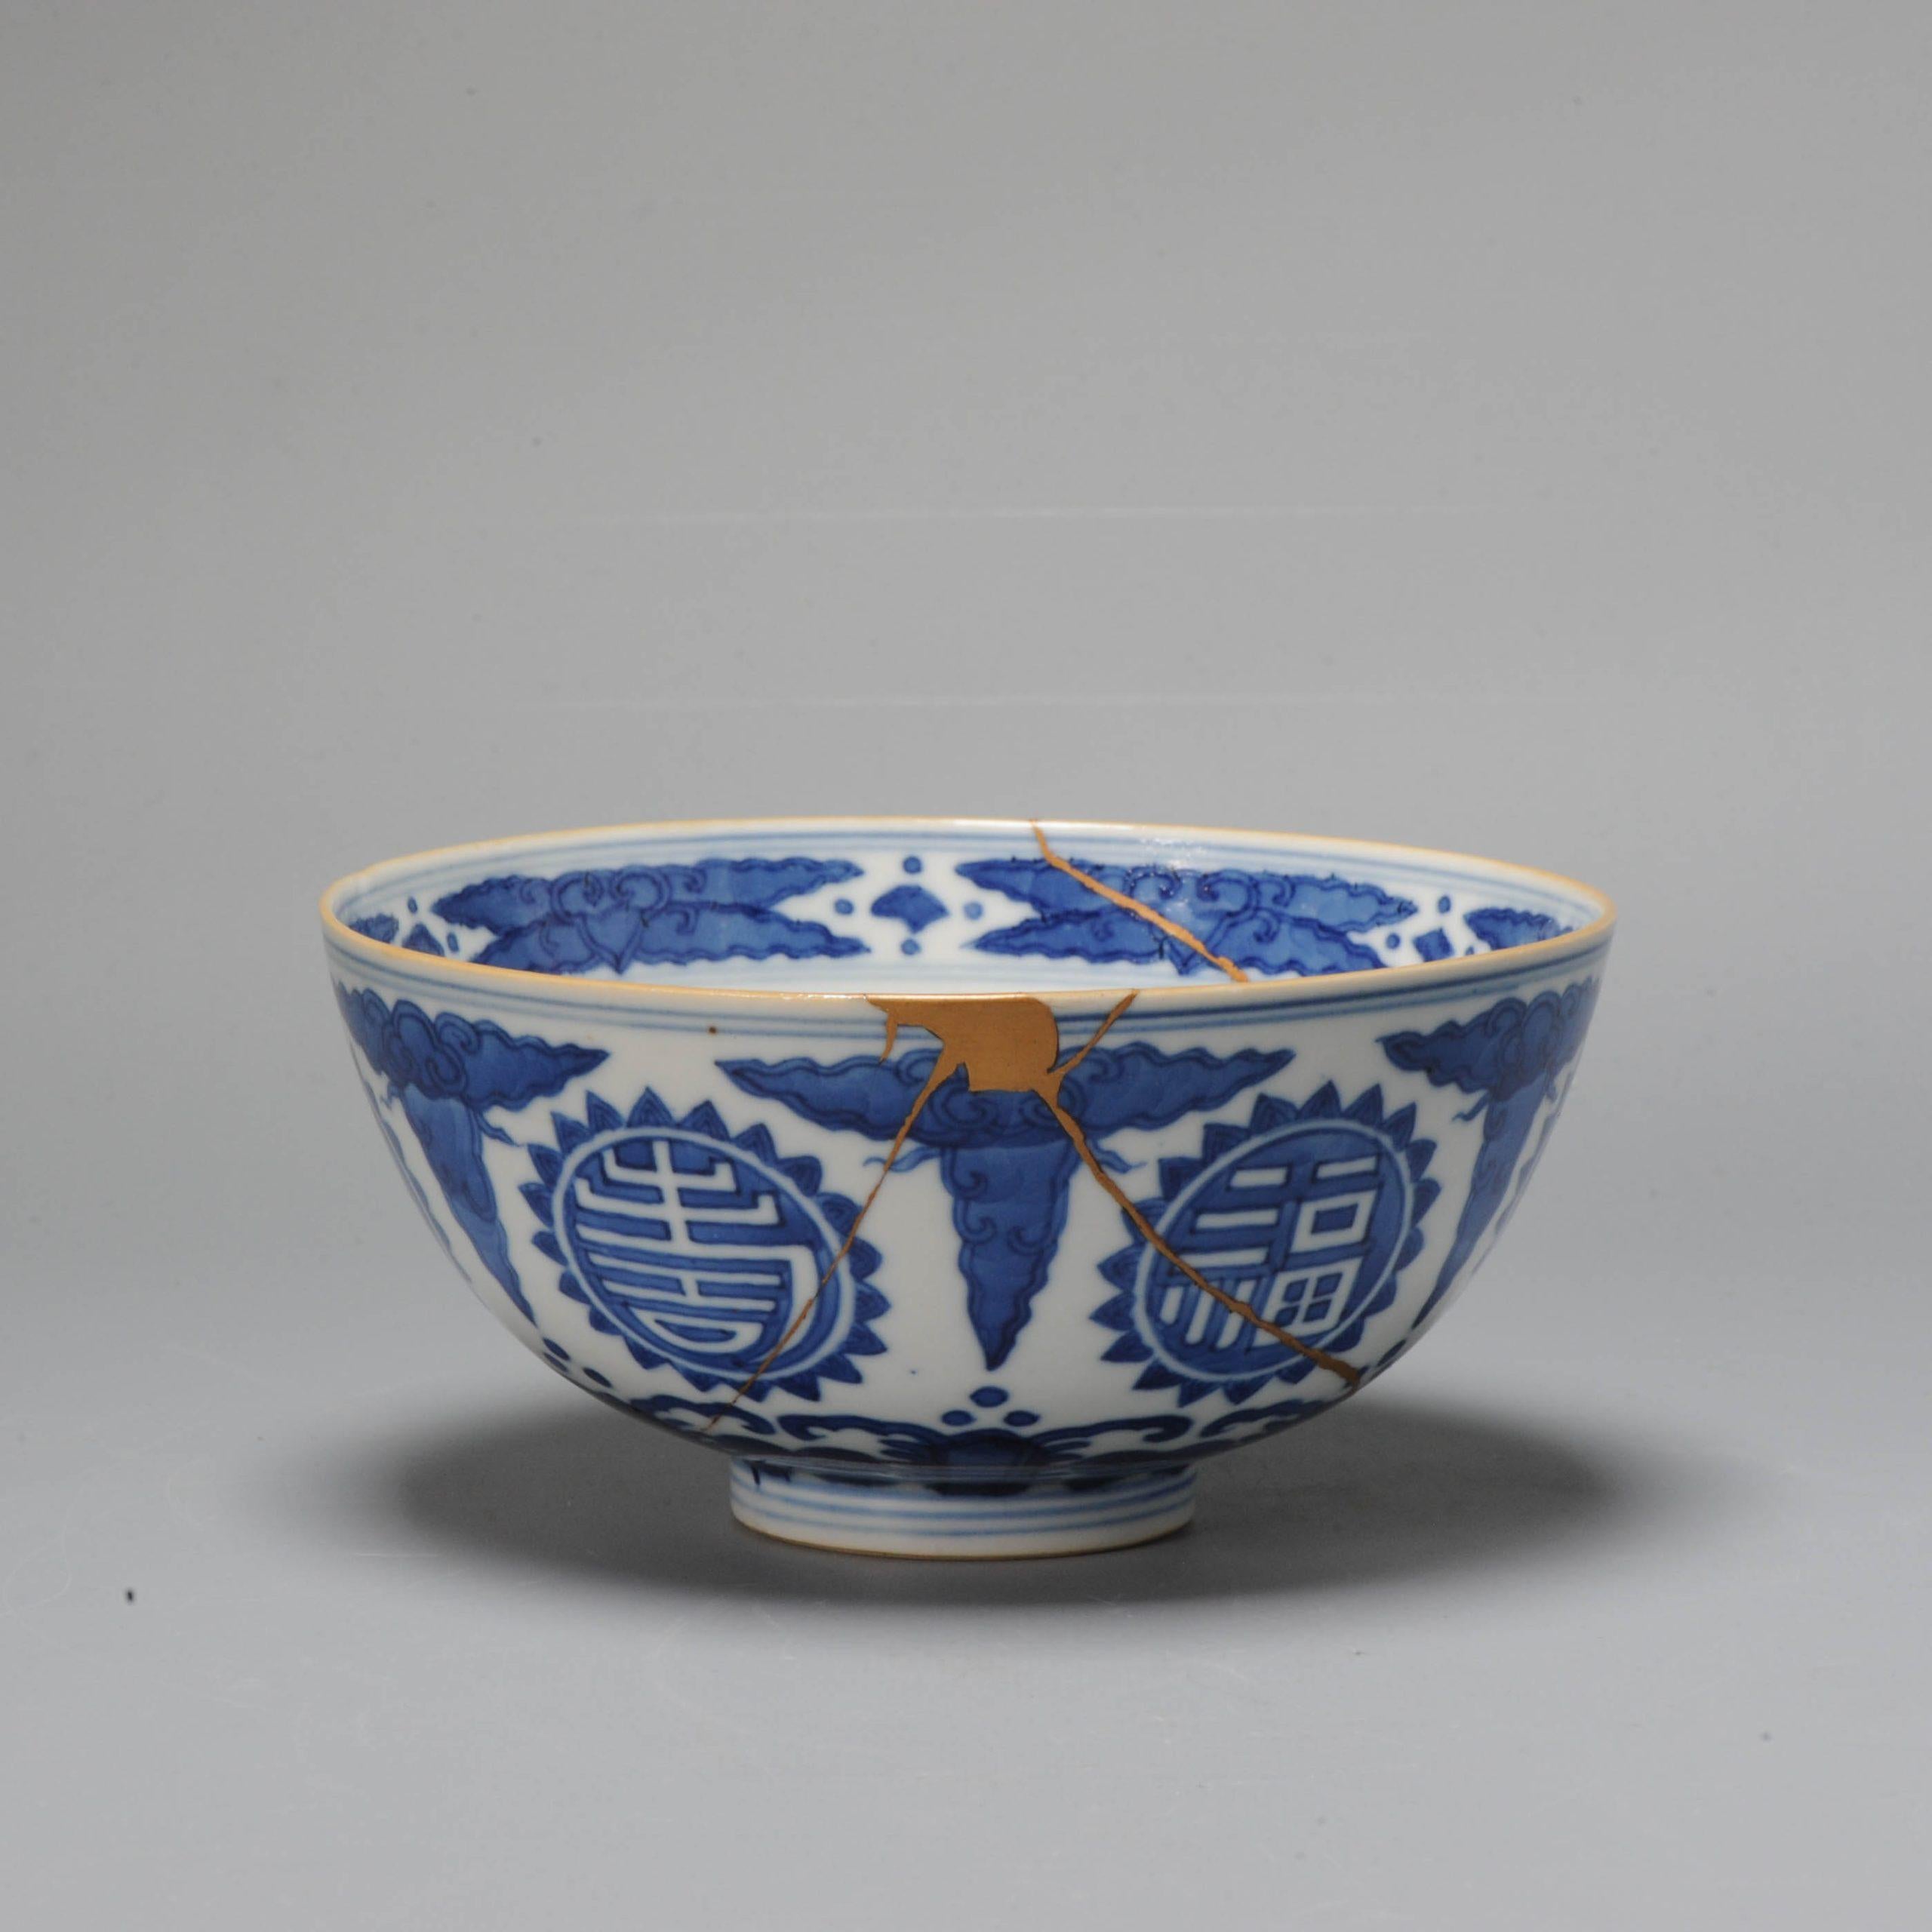 Description
An absolute top quality Kangxi period bowl. With superior Kintsugi repair. Jiajing marked and style.

Condition
Beautiful Kintsugi repairs of lines. Size 153x76mm DiameterxHeight

Period
18th century Qing (1661 - 1912).